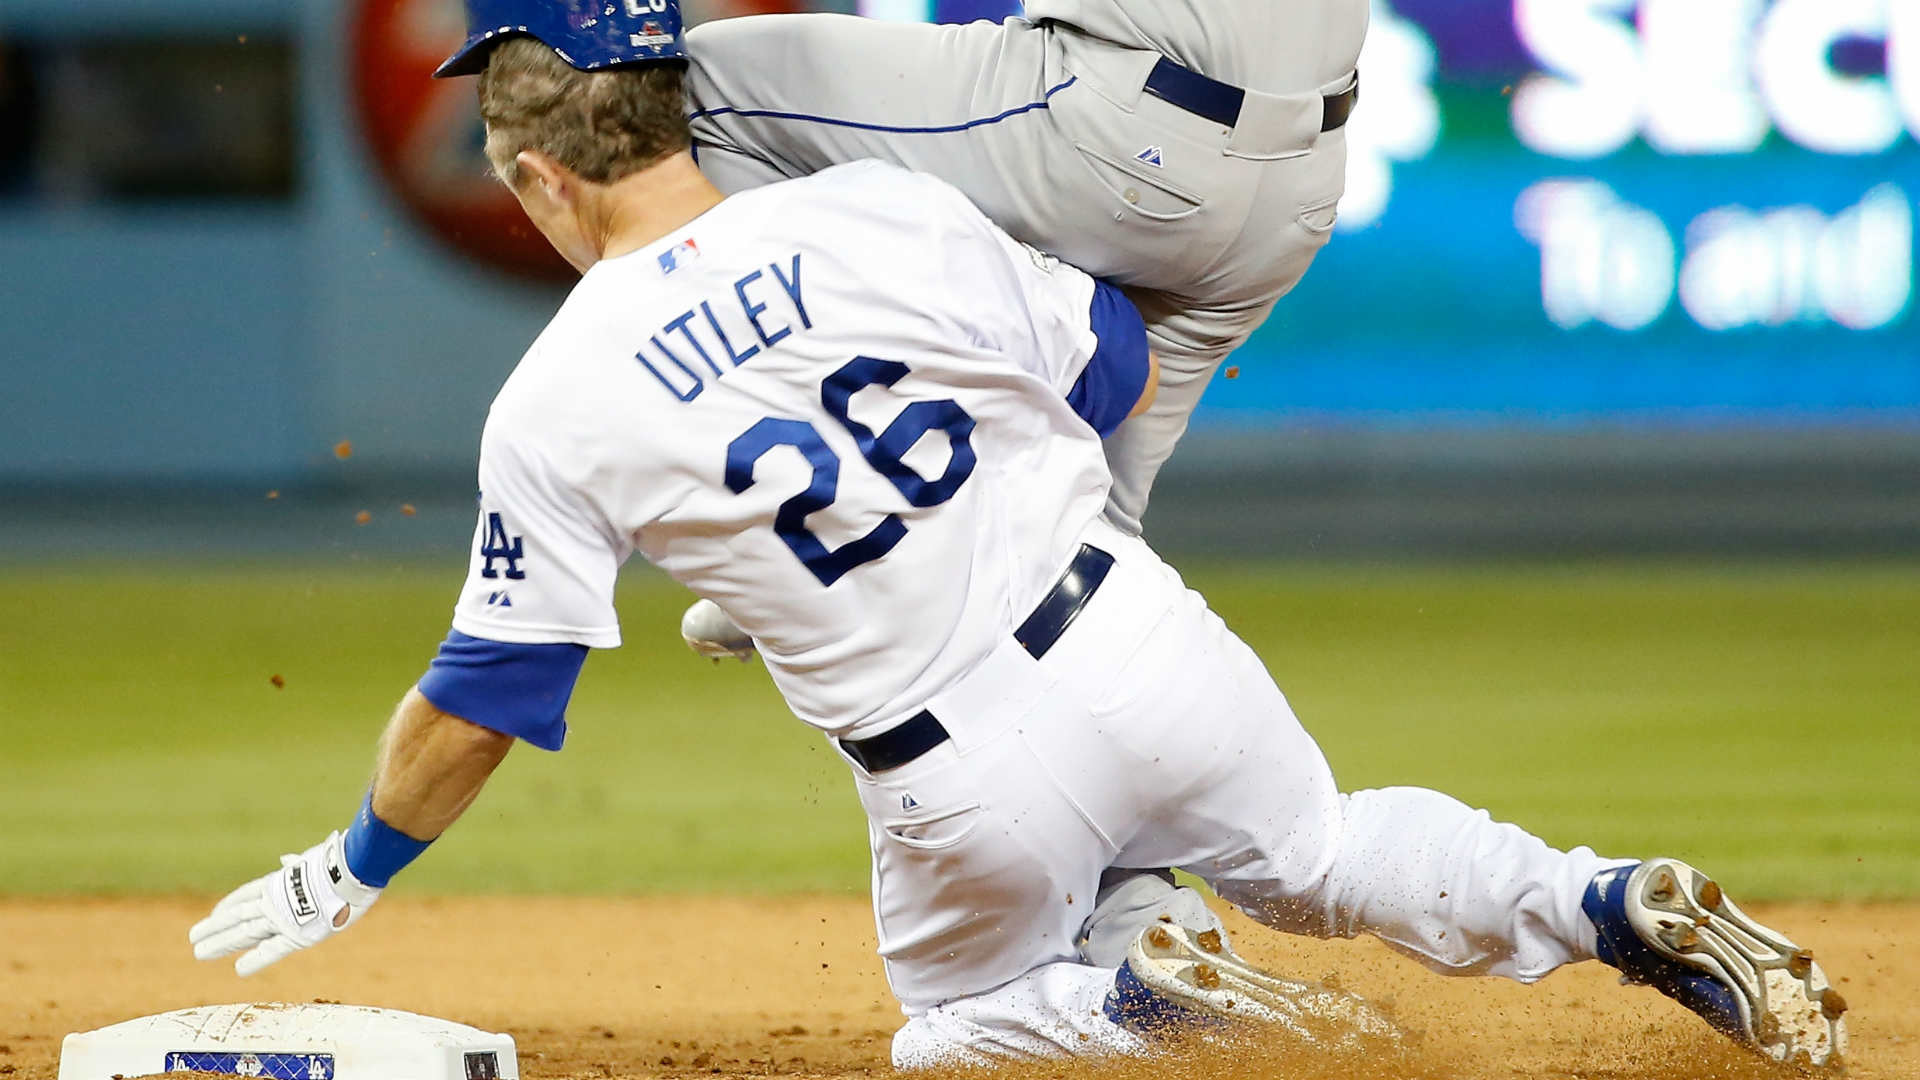 1920x1080 2048x1366px #846806 Chase Utley (482.13 KB) | 24.06.2015 | By .